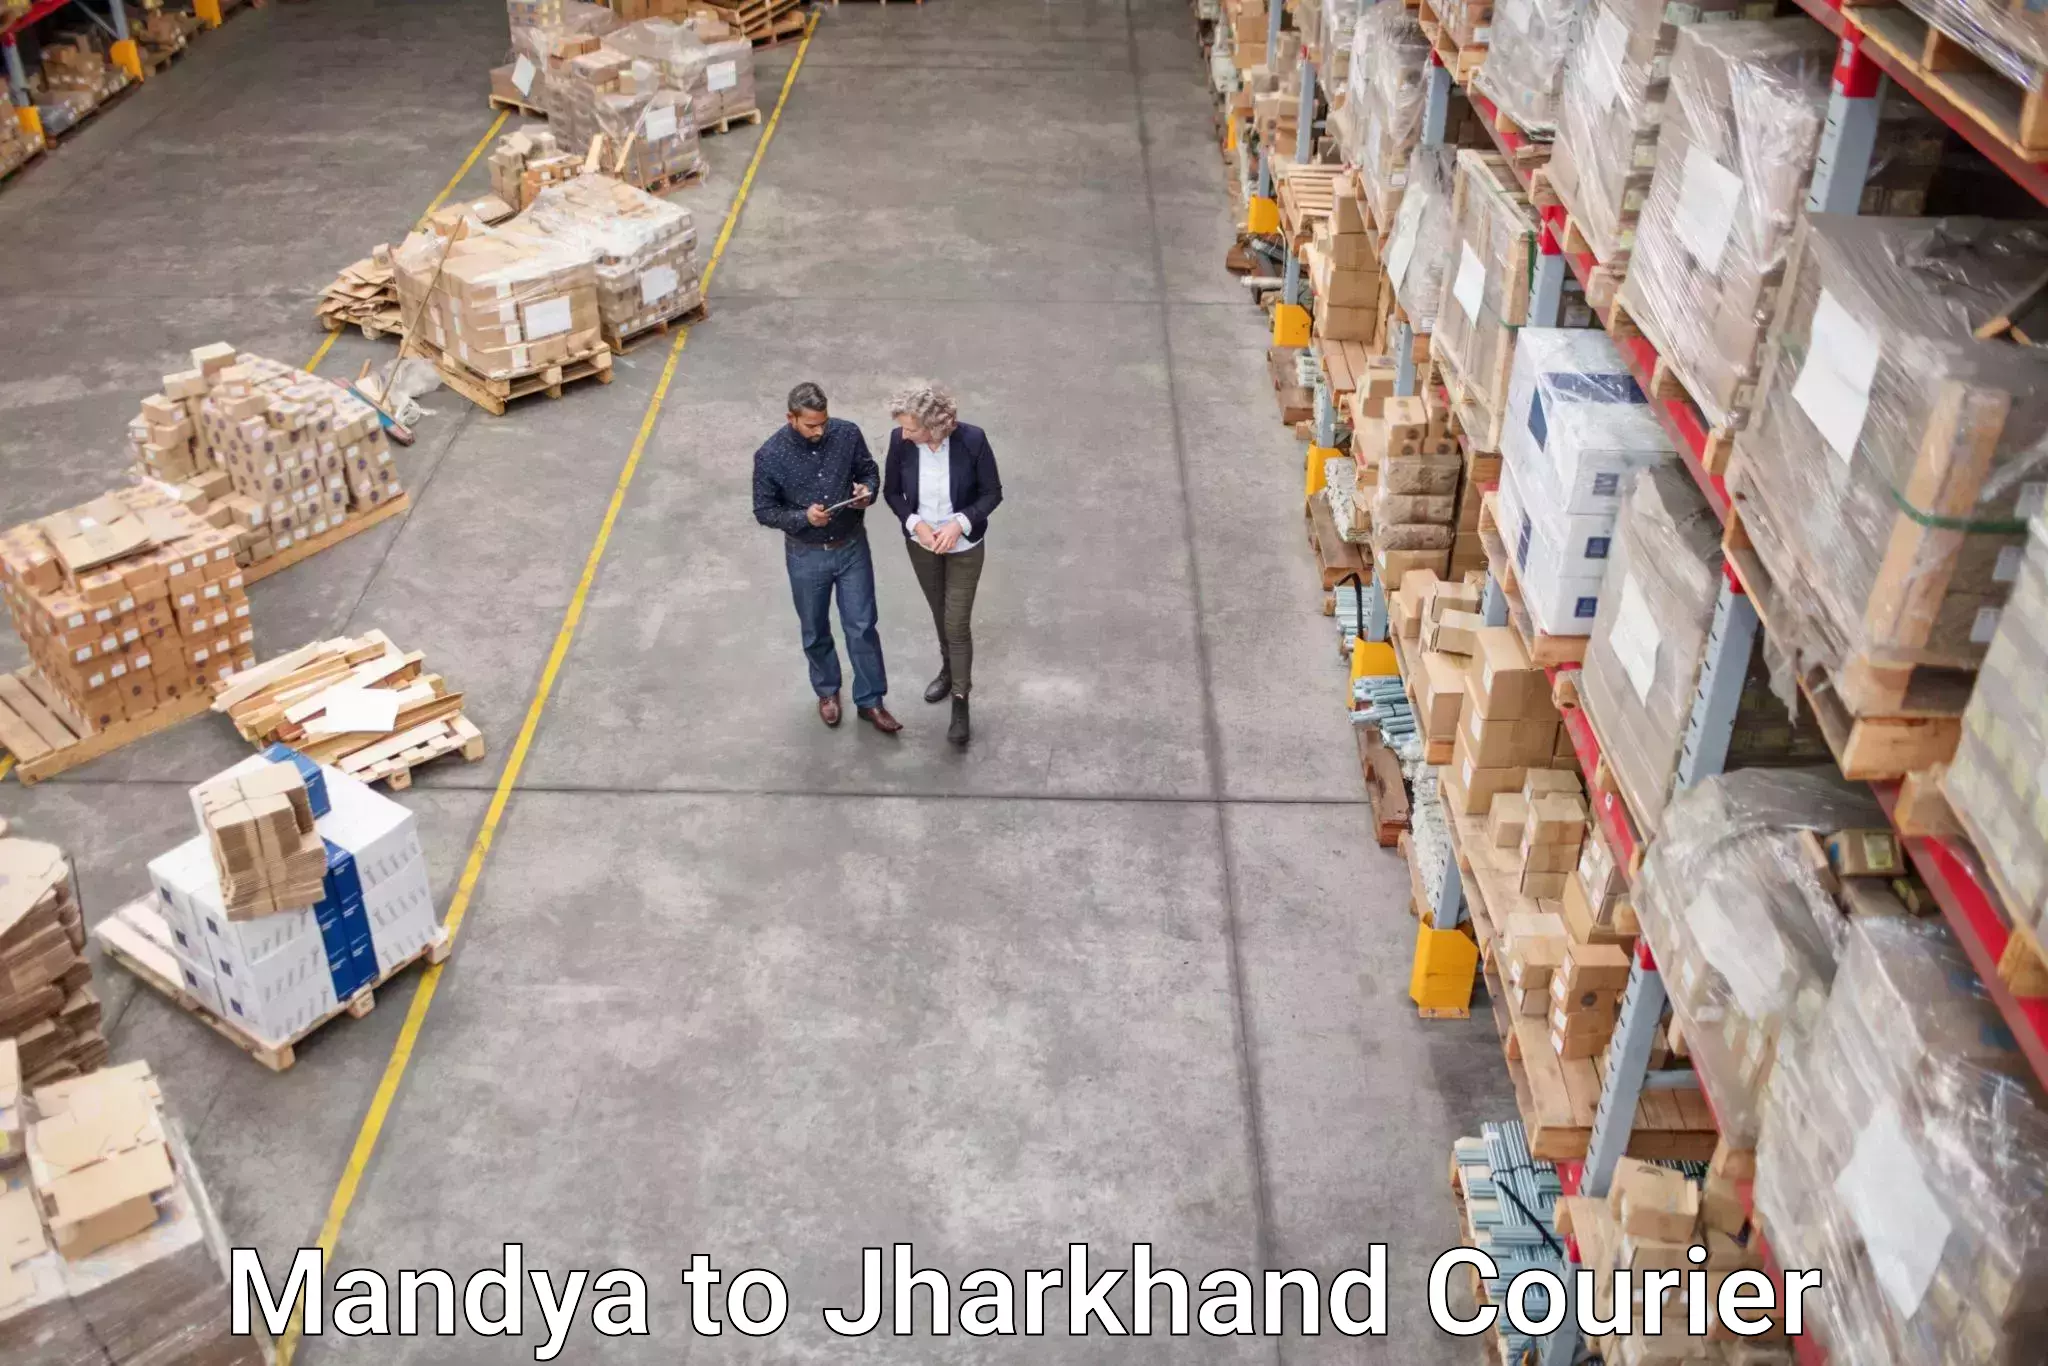 Round-the-clock parcel delivery Mandya to Adityapur